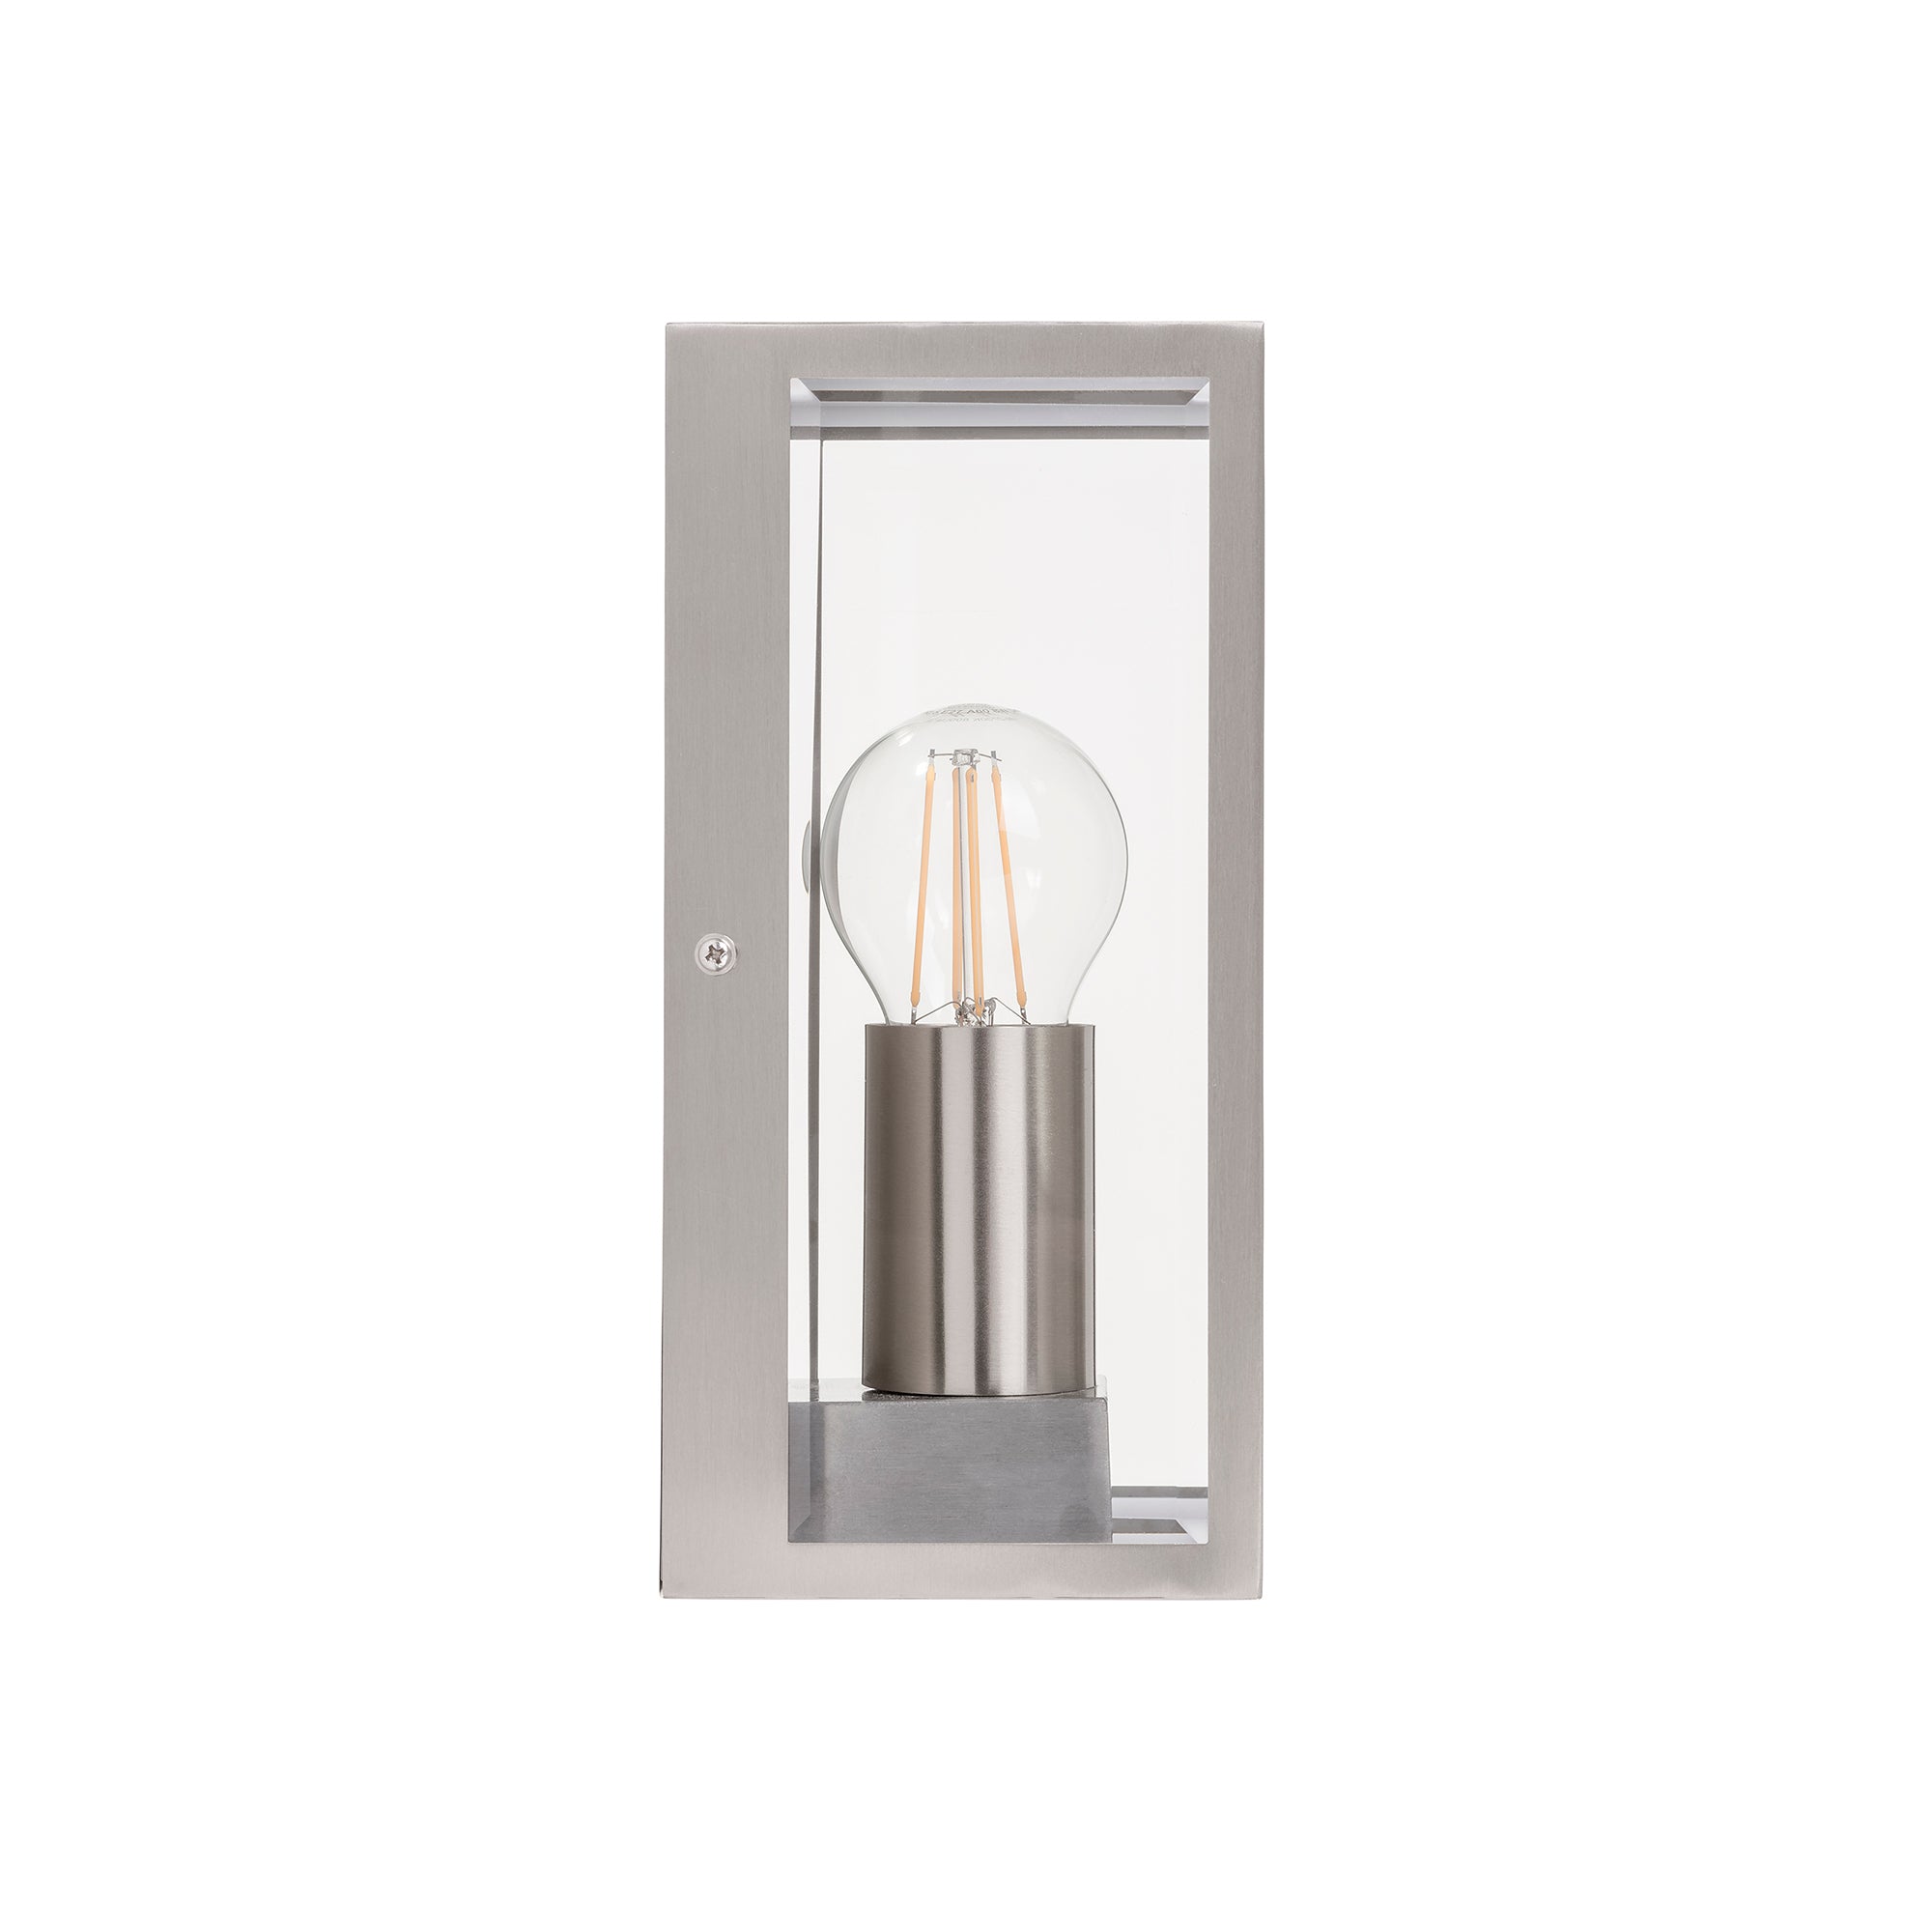 HV3659W-SS316 - Bayside 316 Stainless Steel Wall Light